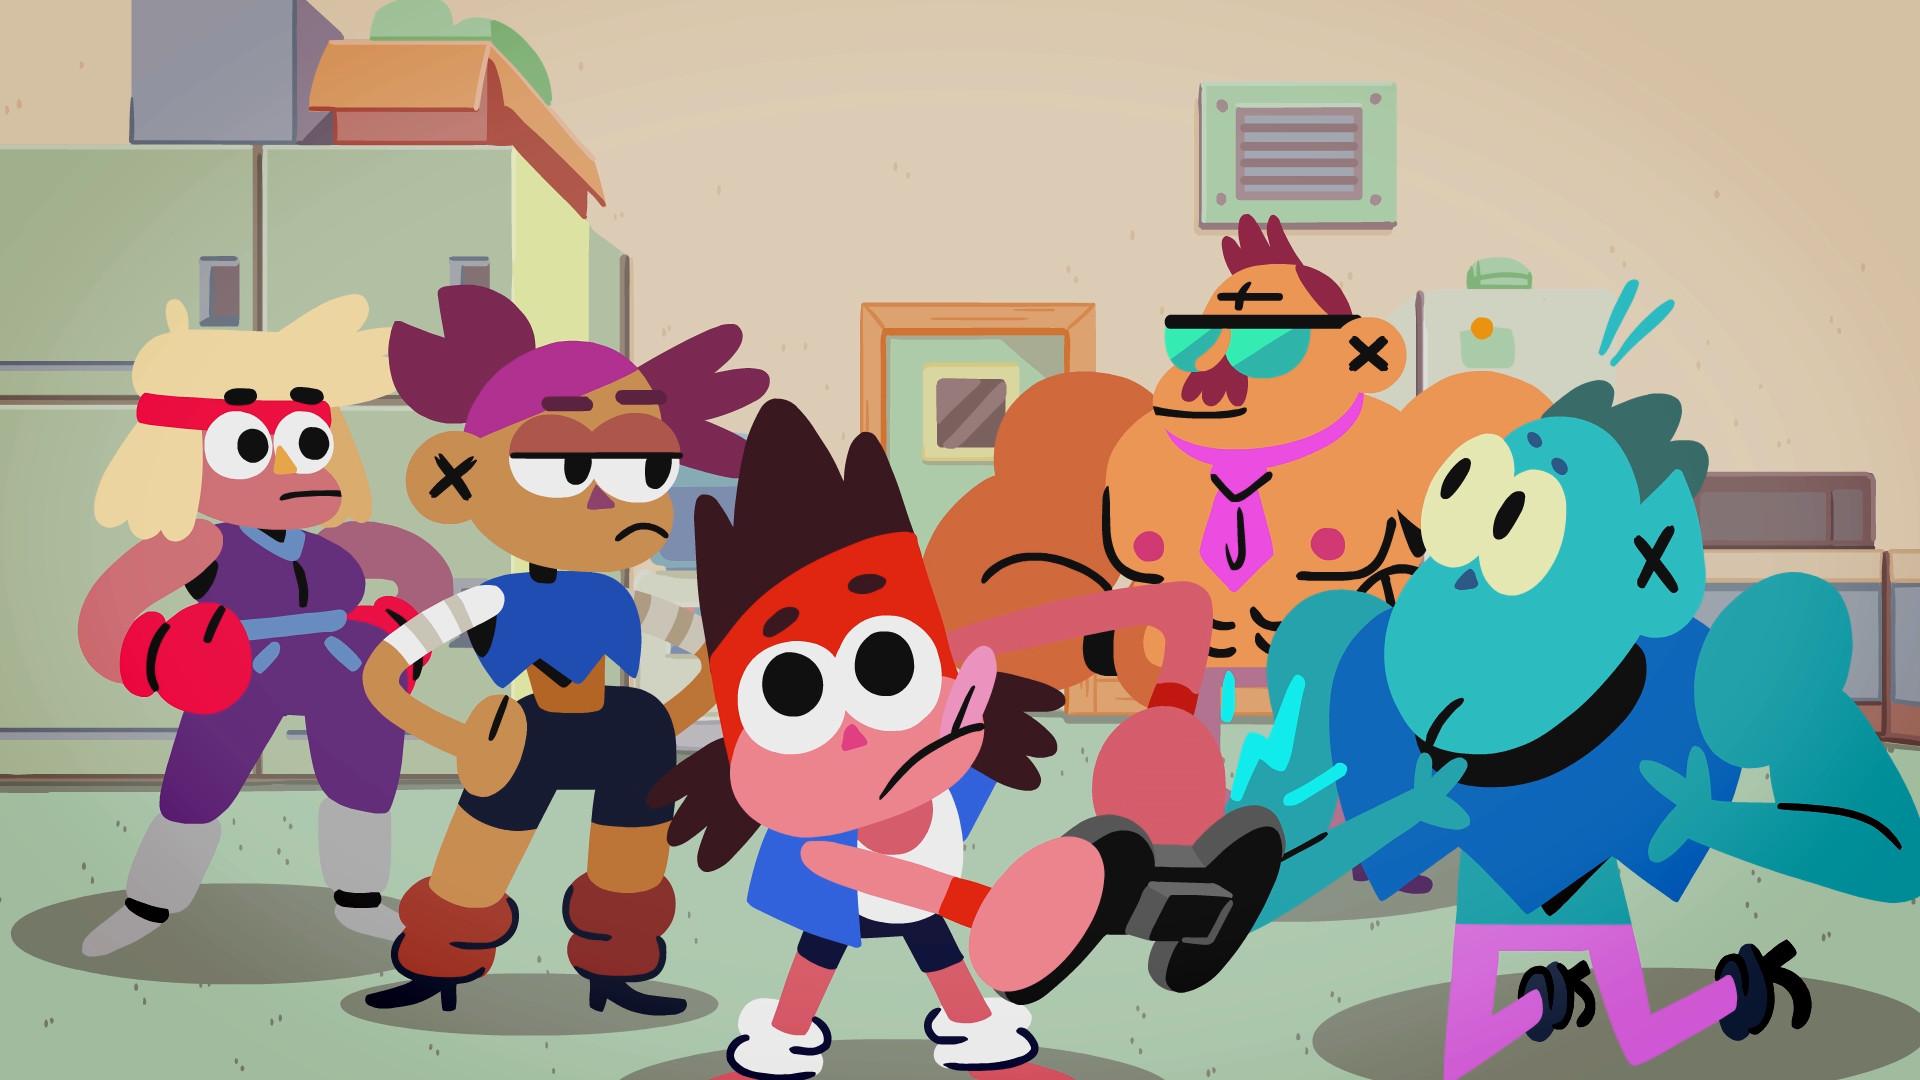 OK K.O.!: Let's Play Heroes (2018) promotional art